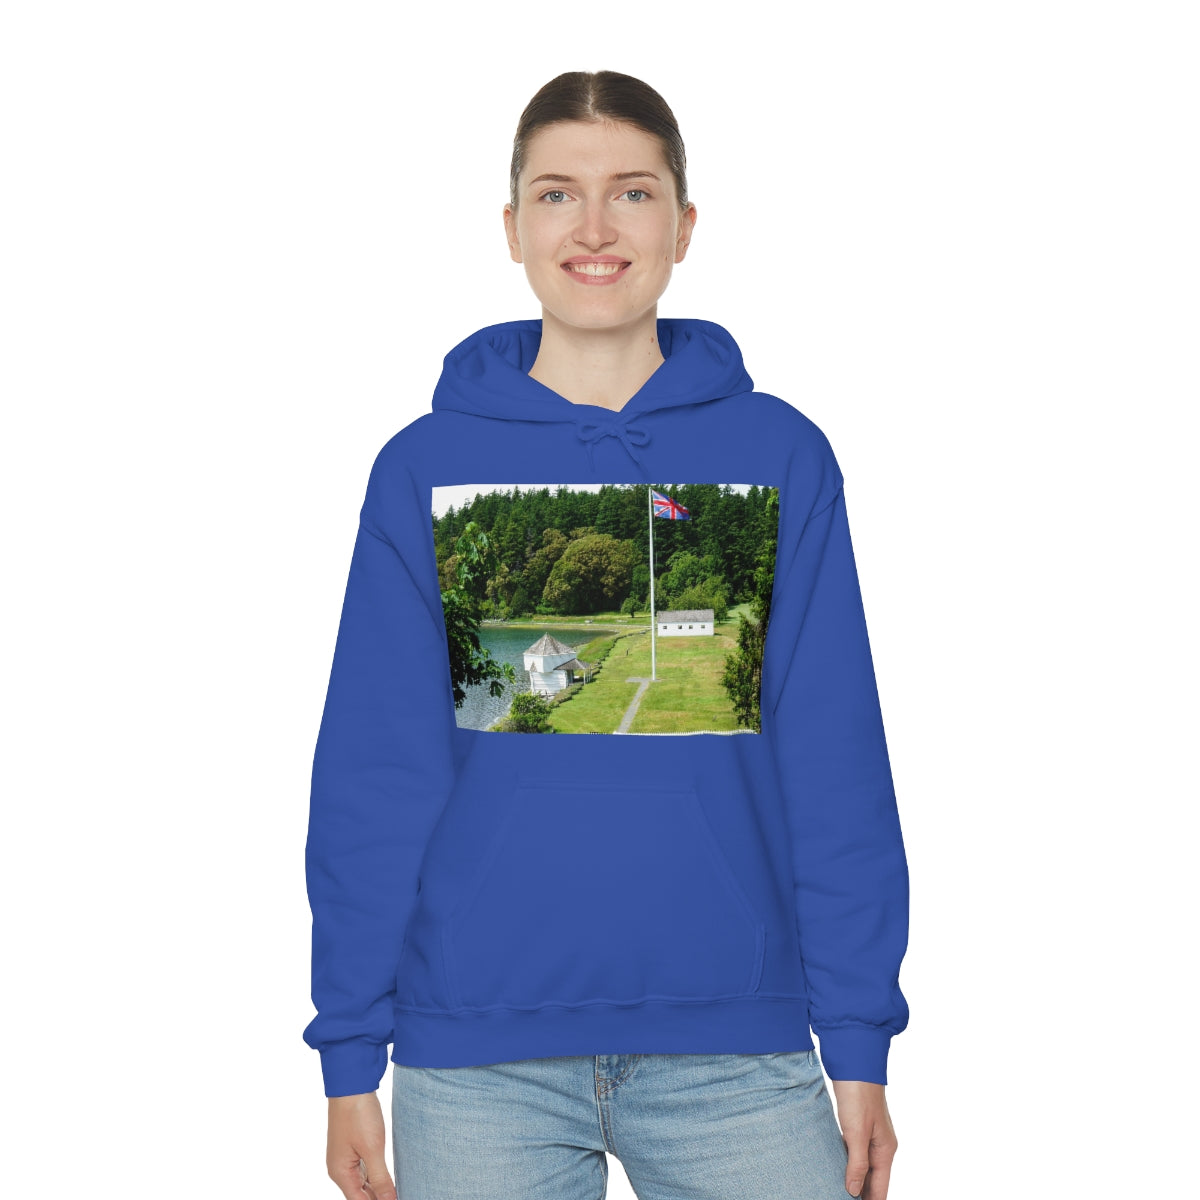 Magnificent Grandiose Views - Unisex Heavy Blend Hooded Sweatshirt - Fry1Productions